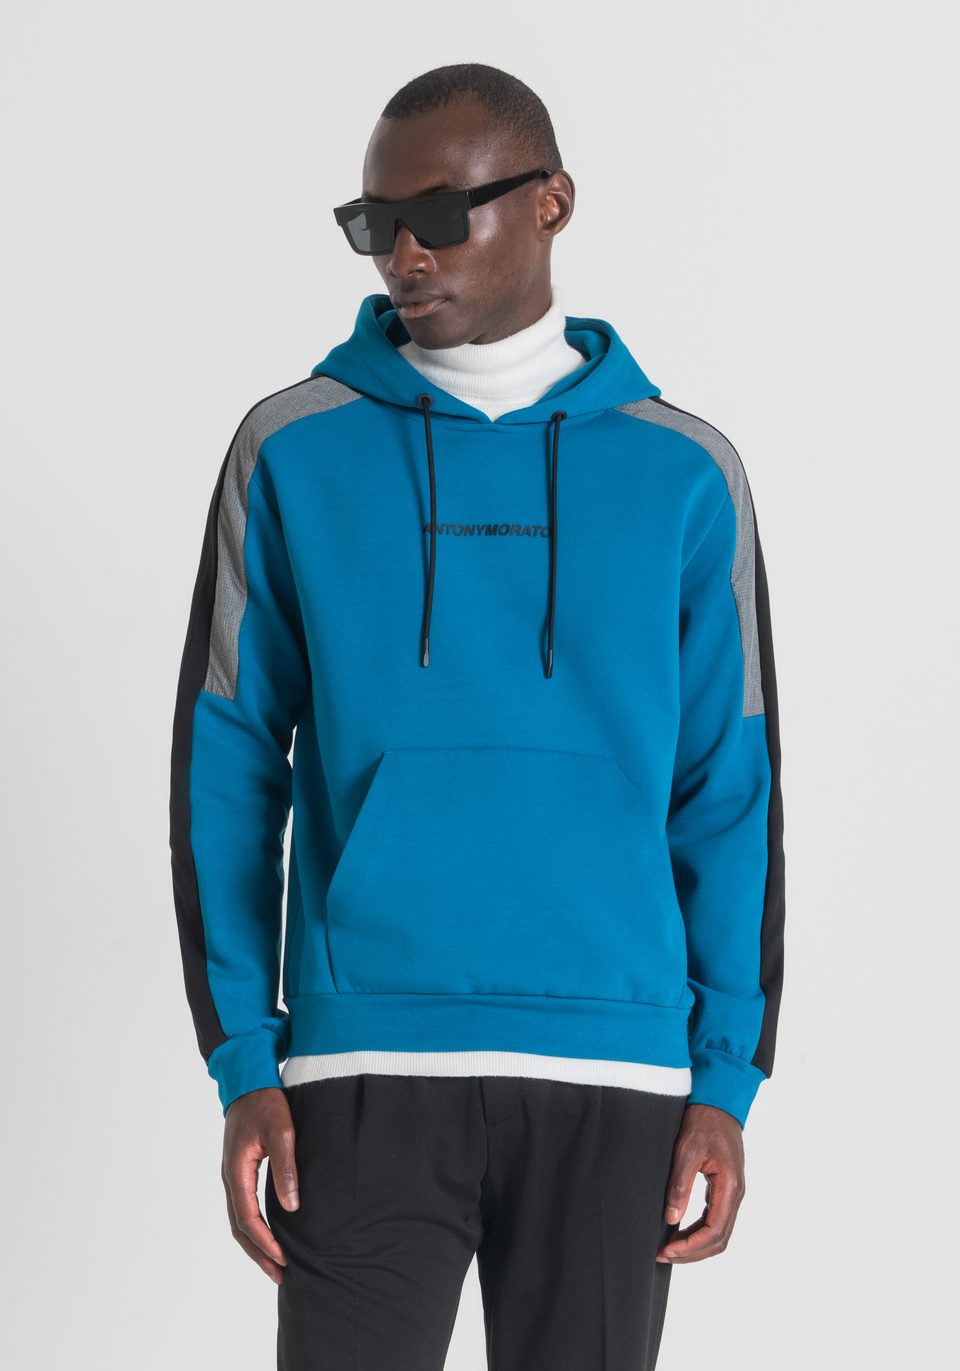 REGULAR-FIT SWEATSHIRT WITH CONTRASTING TECHNICAL FABRIC DETAILS AND HOOD - Antony Morato Online Shop